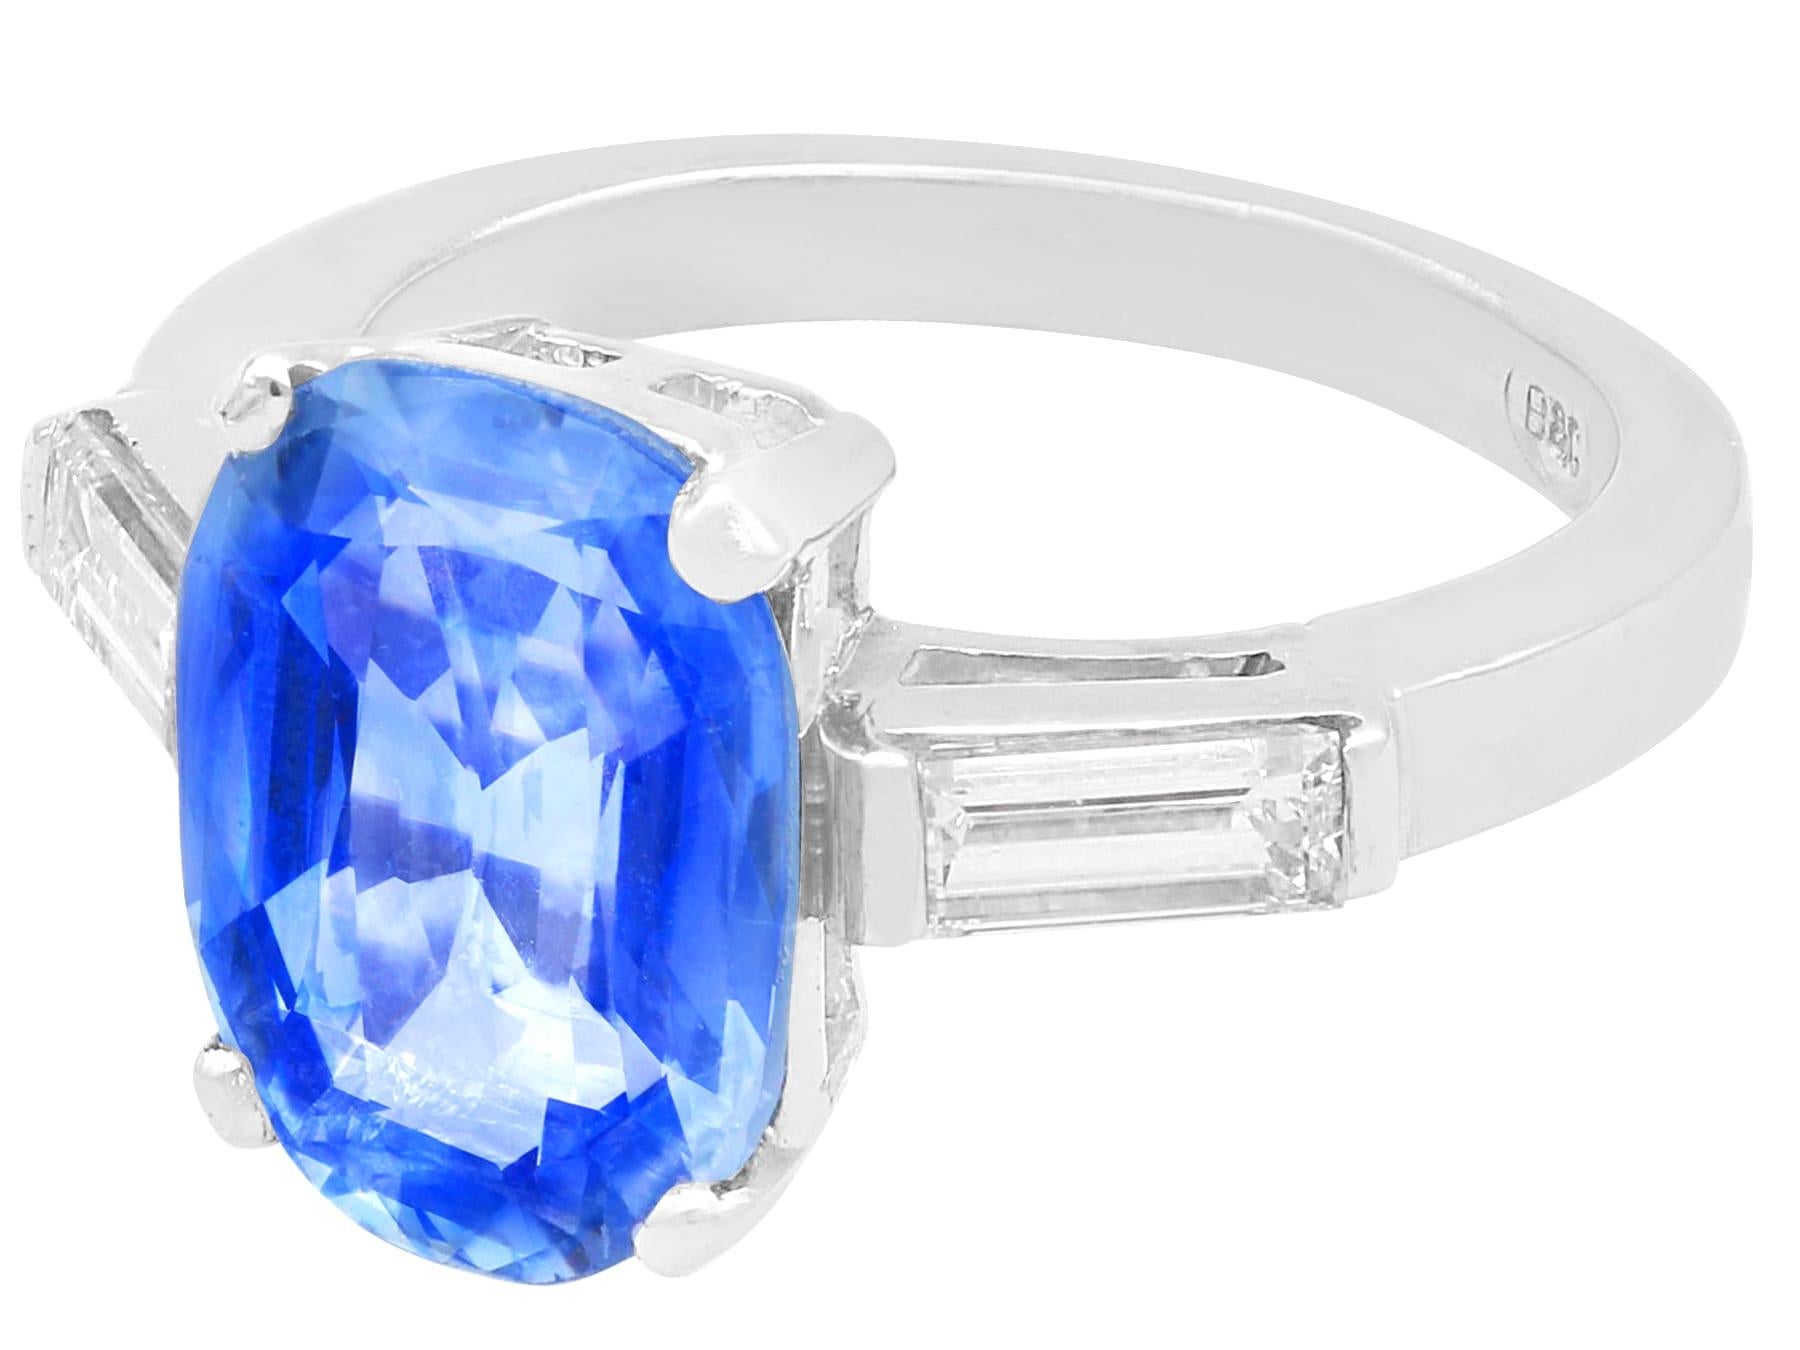 A fine and impressive antique 2.46 carat cushion cut blue sapphire and 0.38 carat diamond, 18 karat white gold dress ring; part of our diverse antique jewellery collections.

This fine and impressive antique Ceylon sapphire ring has been crafted in